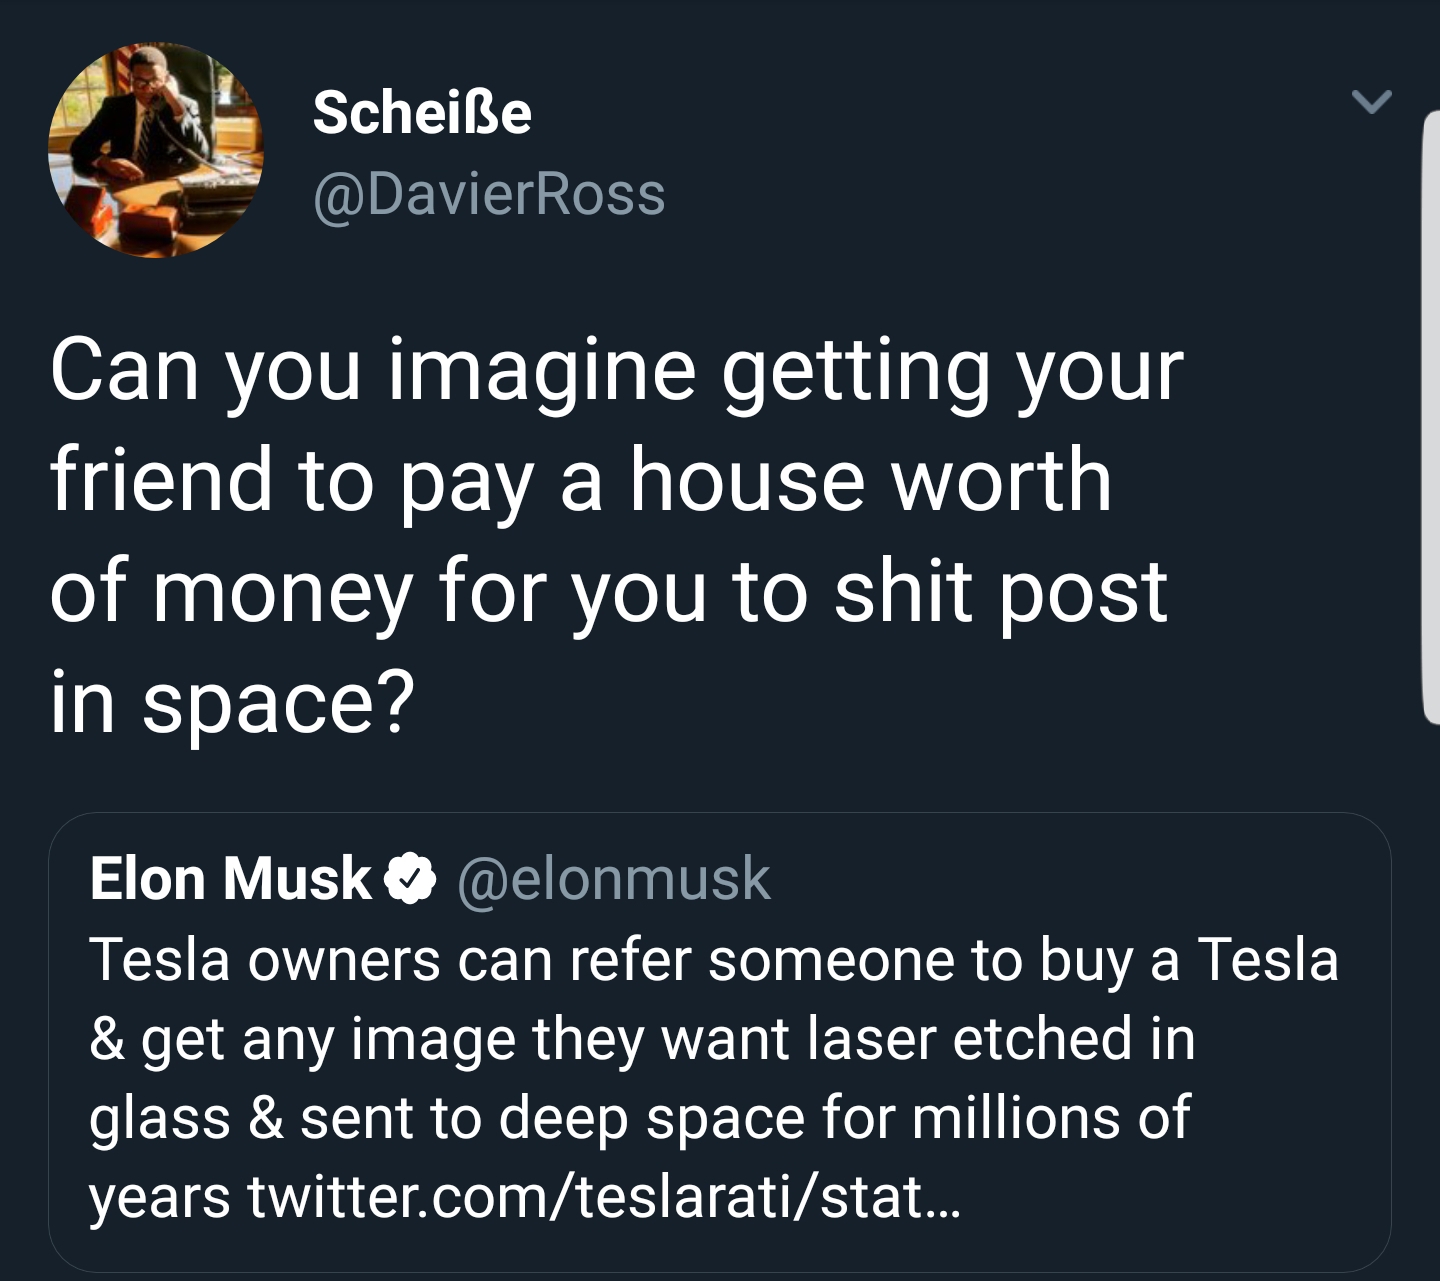 material - Scheie Can you imagine getting your friend to pay a house worth of money for you to shit post in space? Elon Musk Tesla owners can refer someone to buy a Tesla & get any image they want laser etched in glass & sent to deep space for millions of